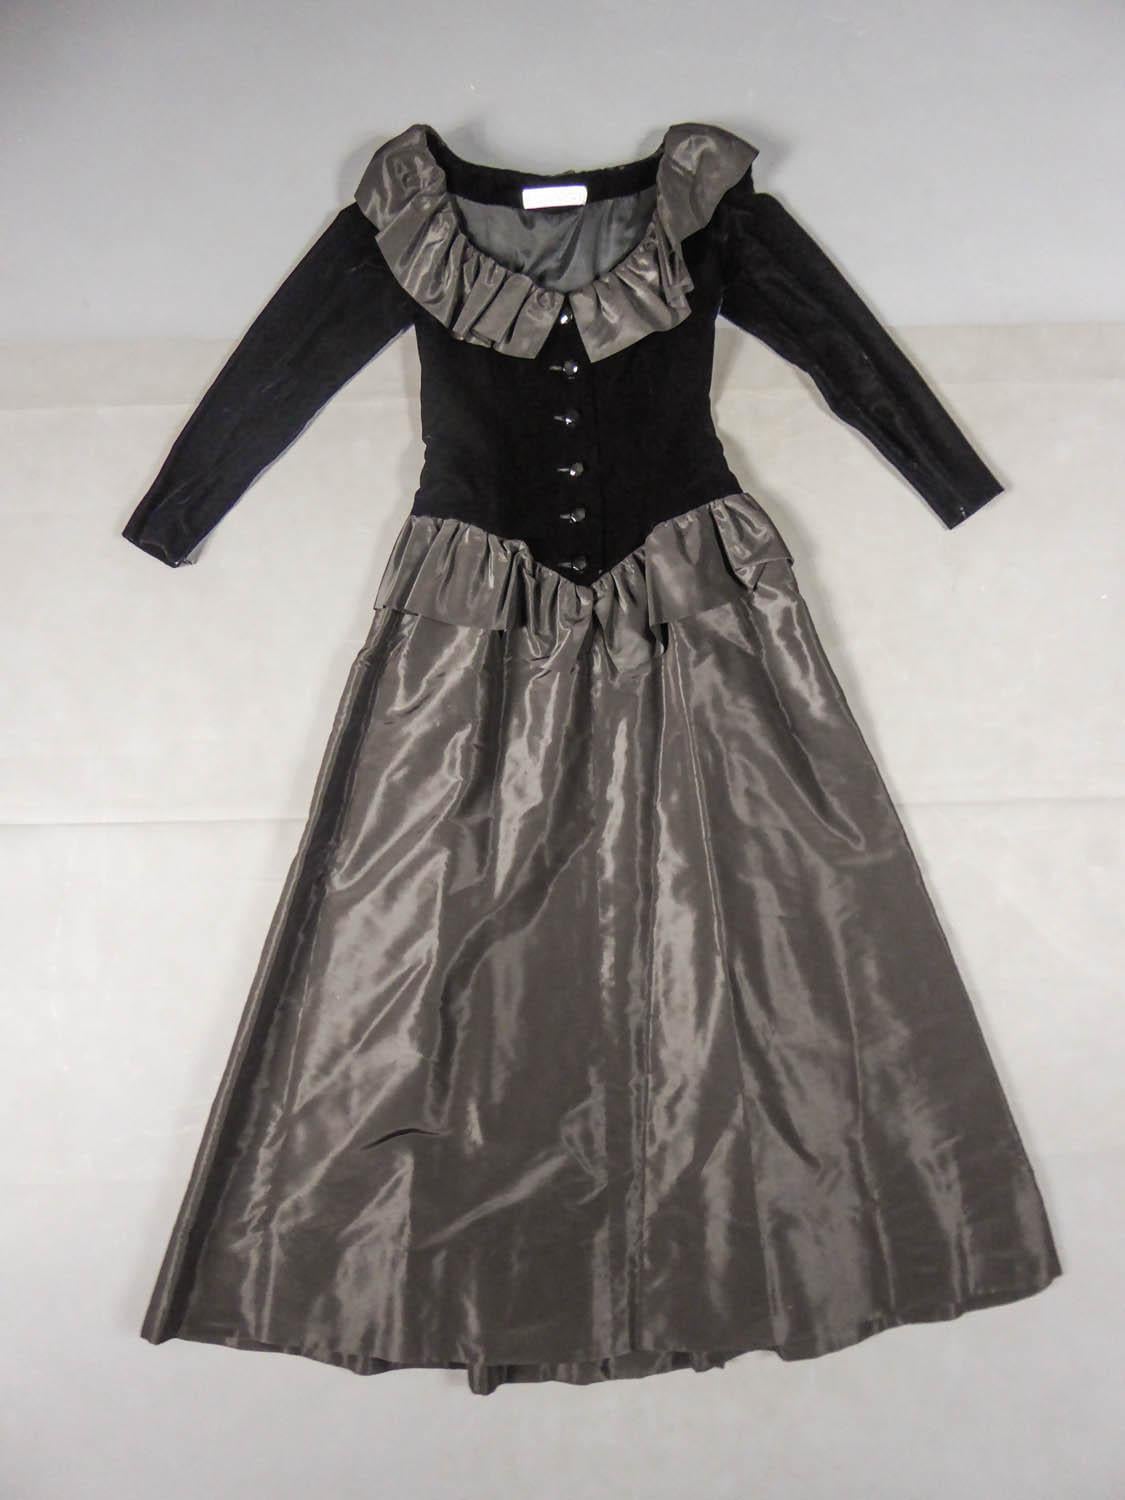 Circa 1980
France

Elegant Givenchy Couture evening dress dating from the early 1980s. Low-rise skirt with pointed cut-out front and ruffles in black silk taffeta. Fitted bustier with black velvet sleeves and large Pierrot low-cut neckline with